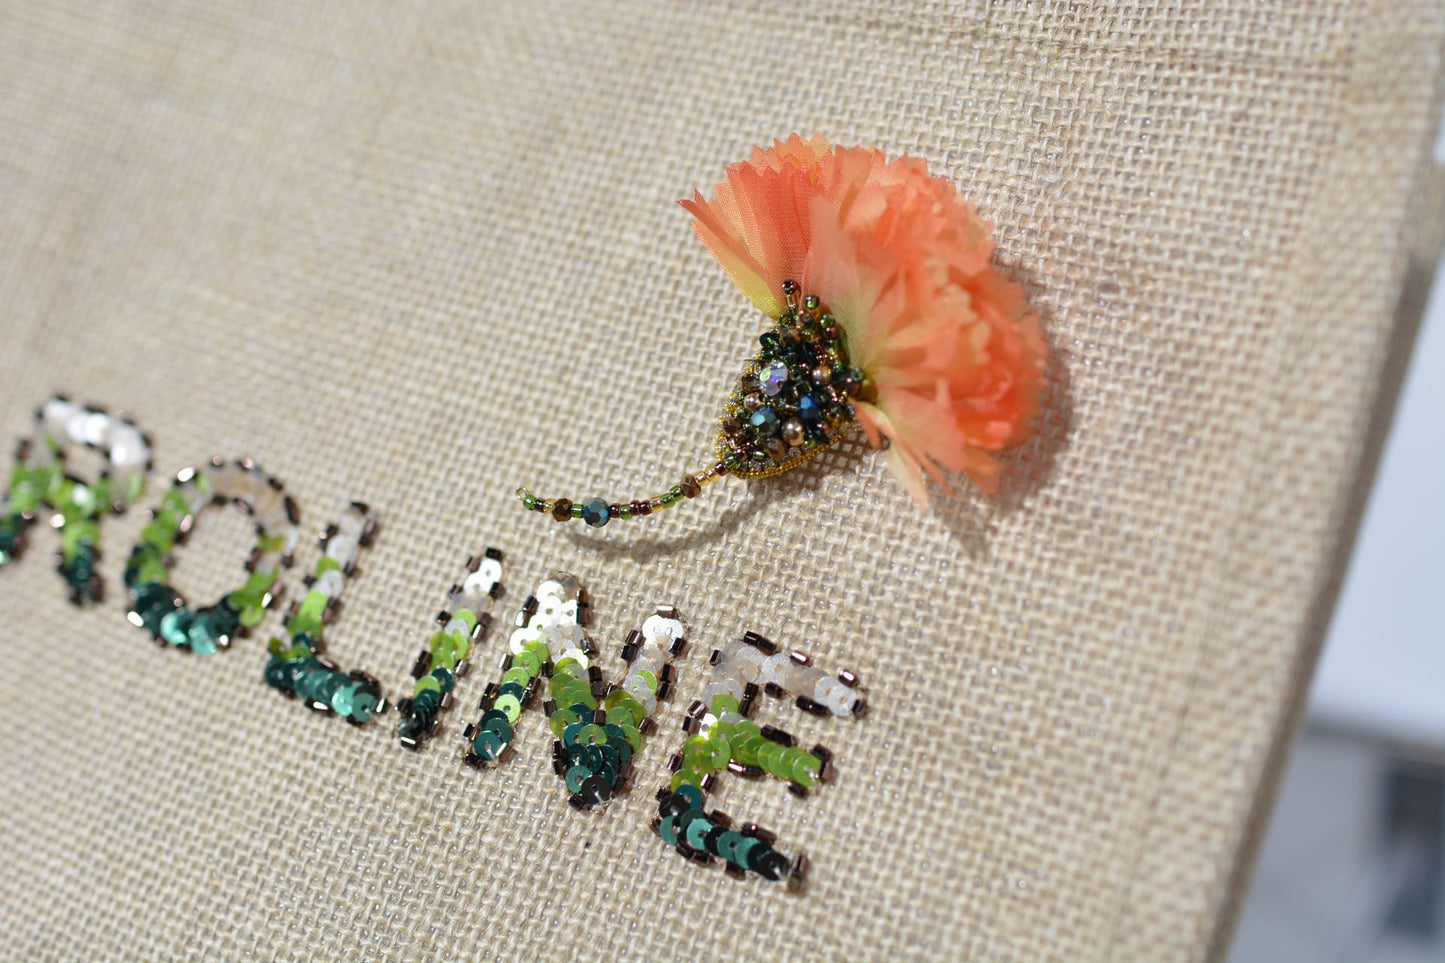 【Beginner-friendly】Fabric Flower & Embroidery: Carnation 【3 hours】